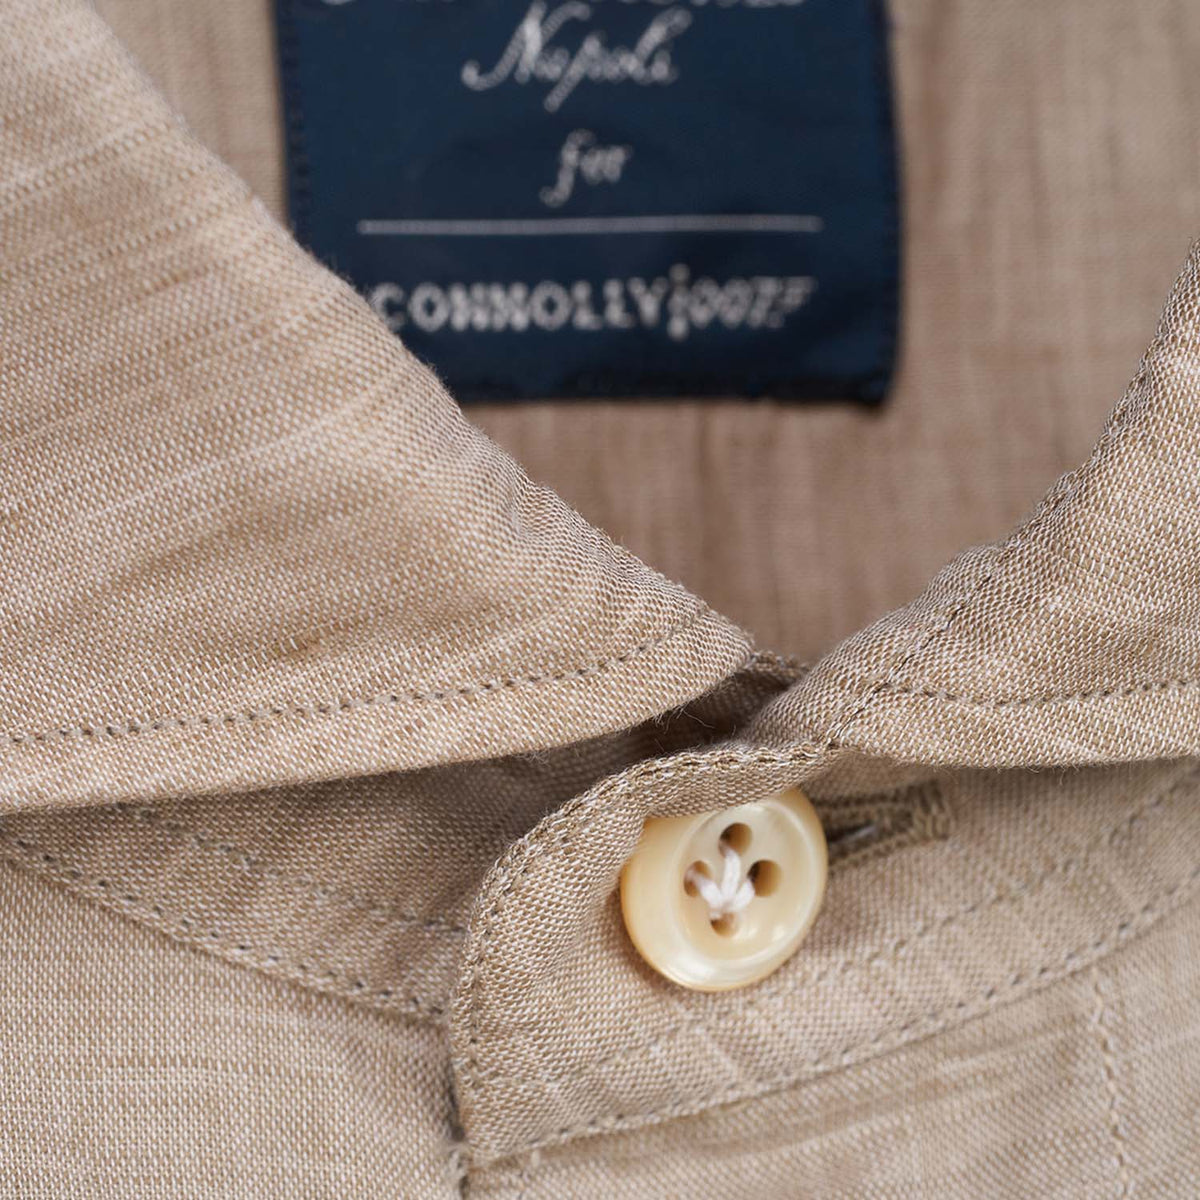 James Bond No Time To Die Oatmeal Linen Shirt - By Connolly x Finamore (Pre-order) SHIRT Connolly 